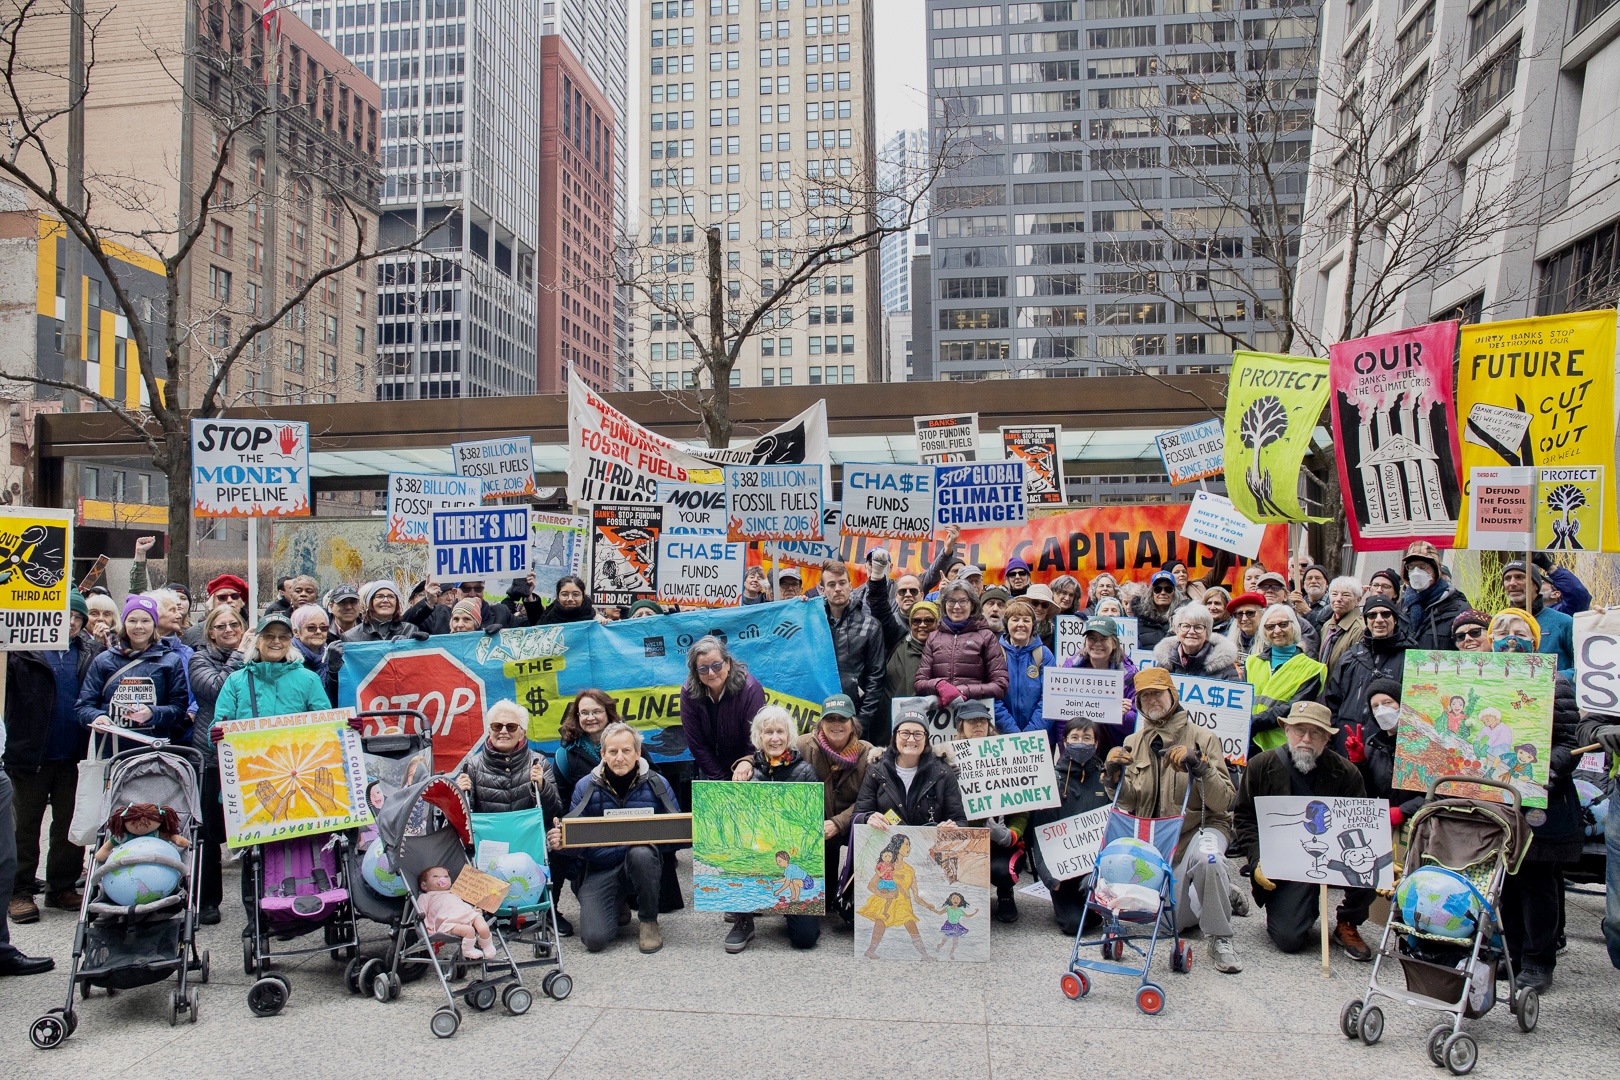 A huge group of people standing and sitting in front of the Chicago skyline. They are dressed in coats, hats, and other winter gear and holding signs encouraging the stopping of fossil fuels.